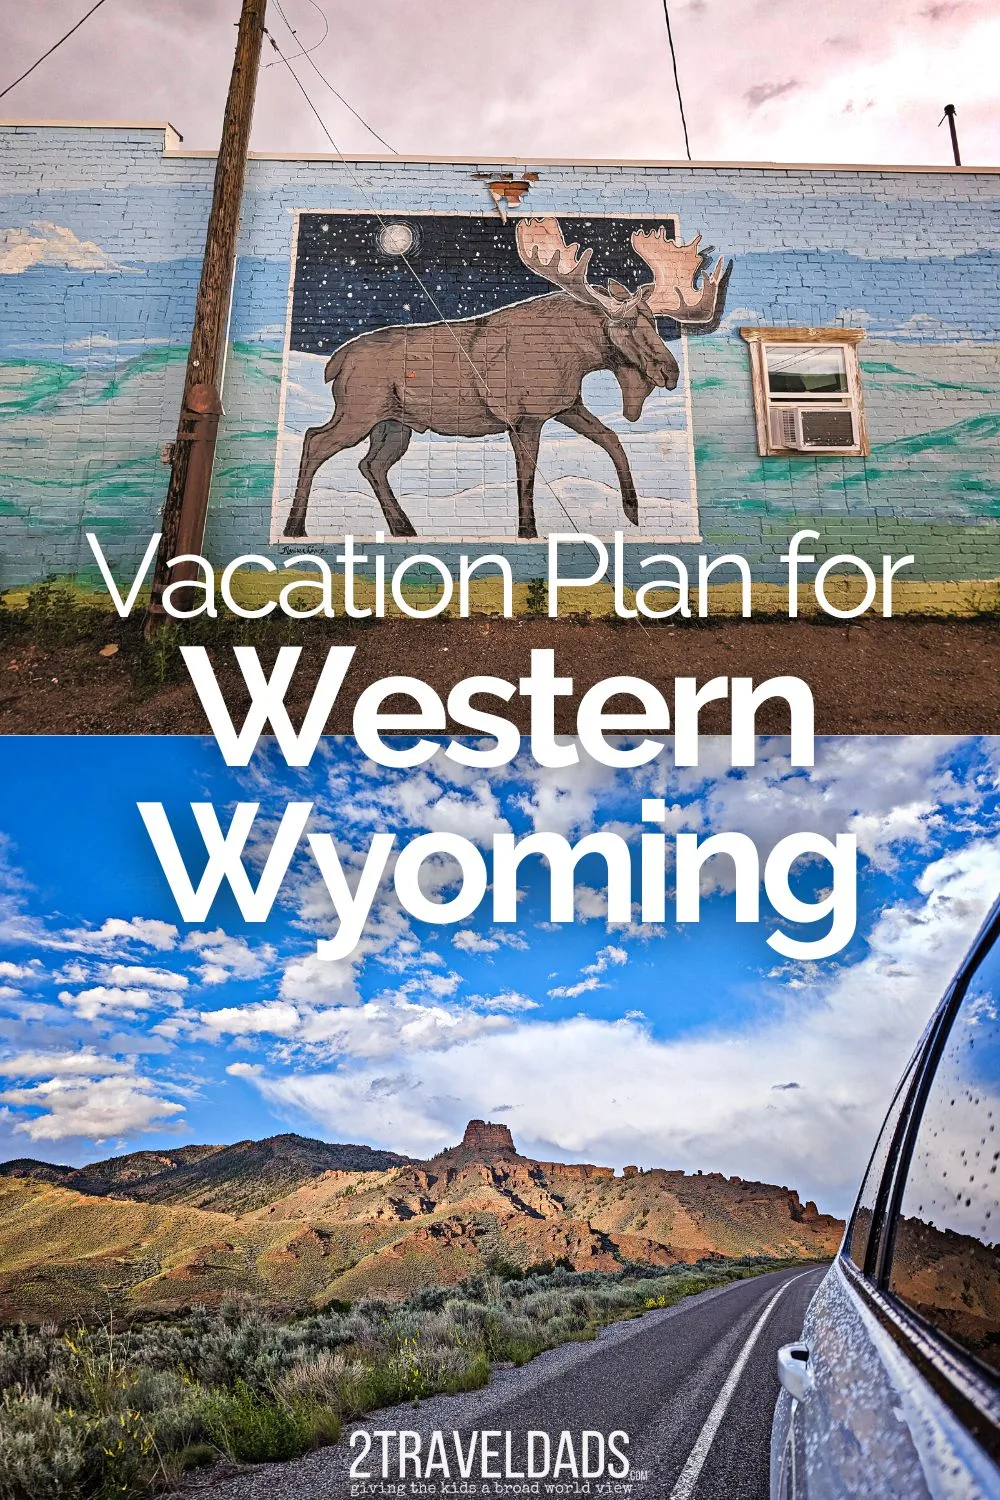 When you want the best of the west you go to Wyoming. But what does that mean? We've got our top picks for things to do in Wyoming that range from horseback riding to dinosaur fossils and Yellowstone National Park, and it's guaranteed to be a memorable vacation plan.